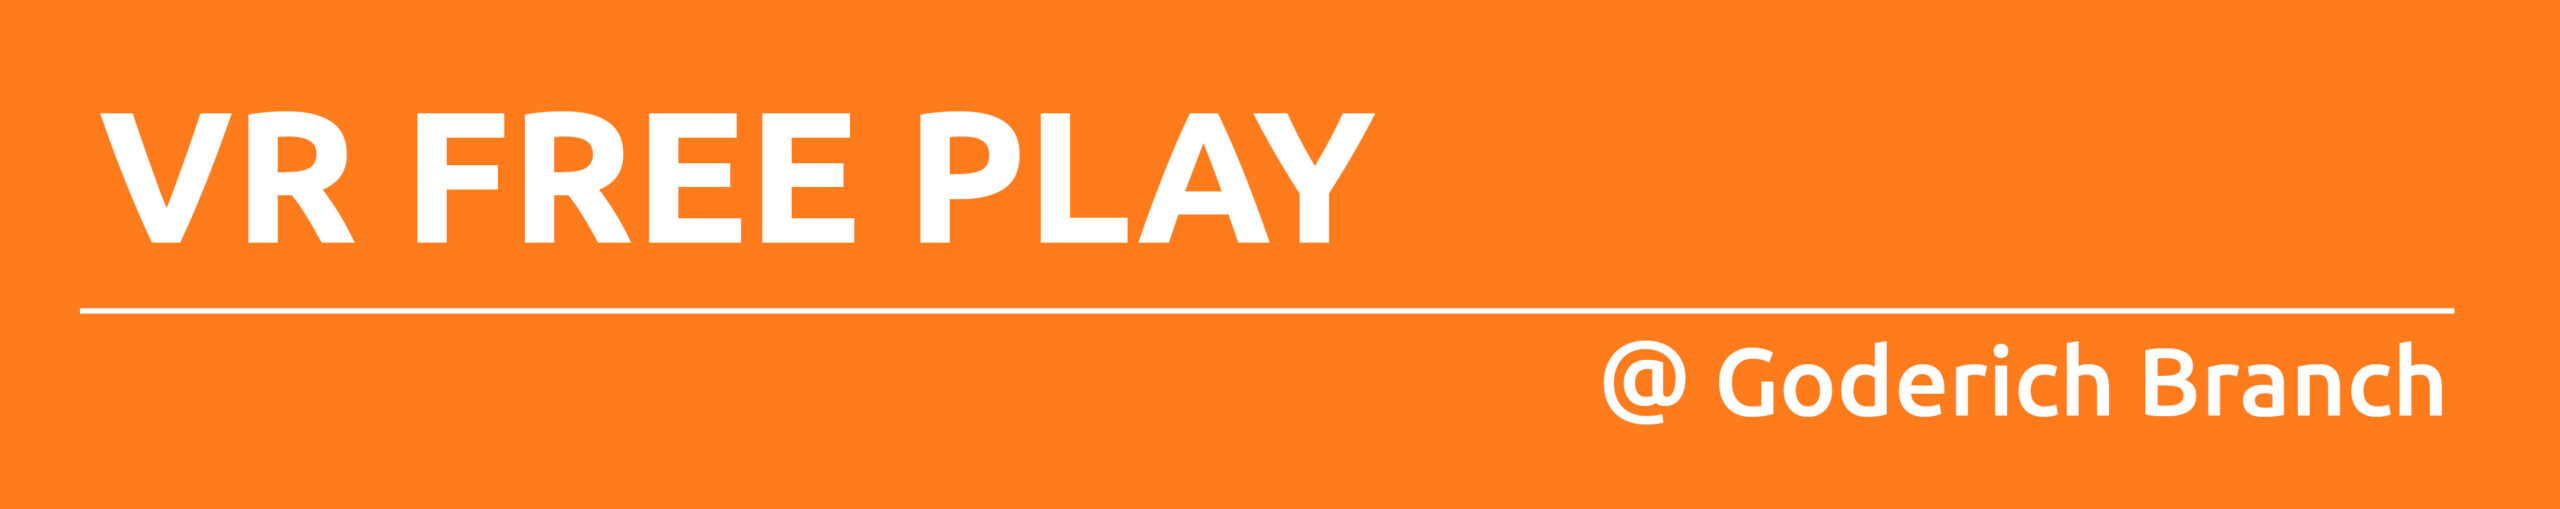 Orange rectangle with white text promoting VR Free Play at Goderich